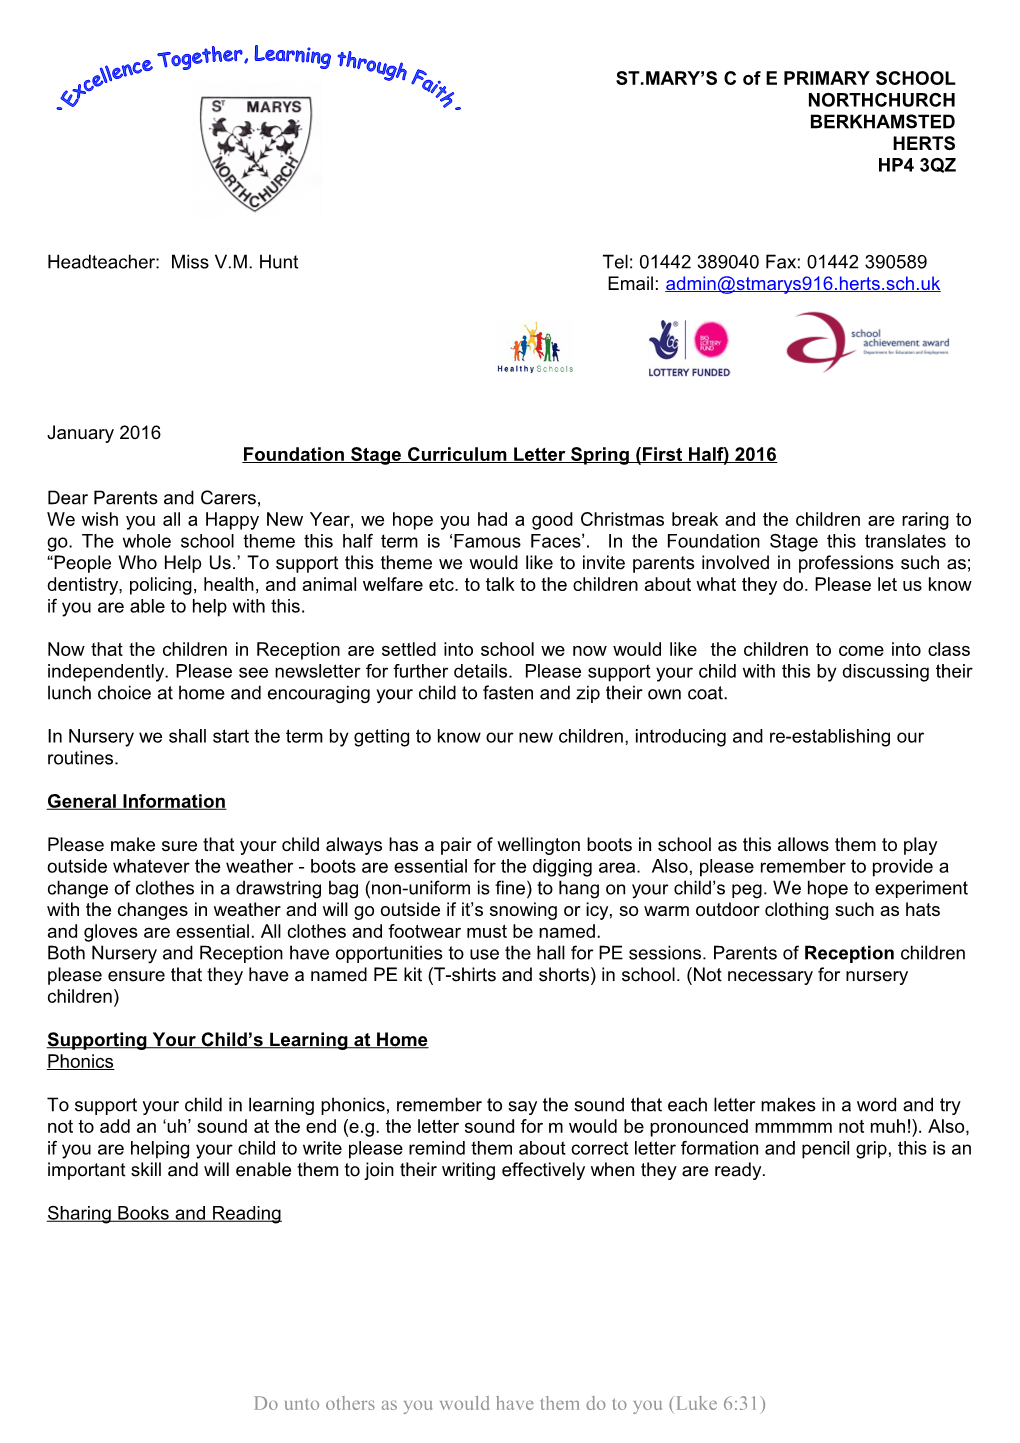 Foundation Stage Curriculum Letter Spring (First Half) 2016